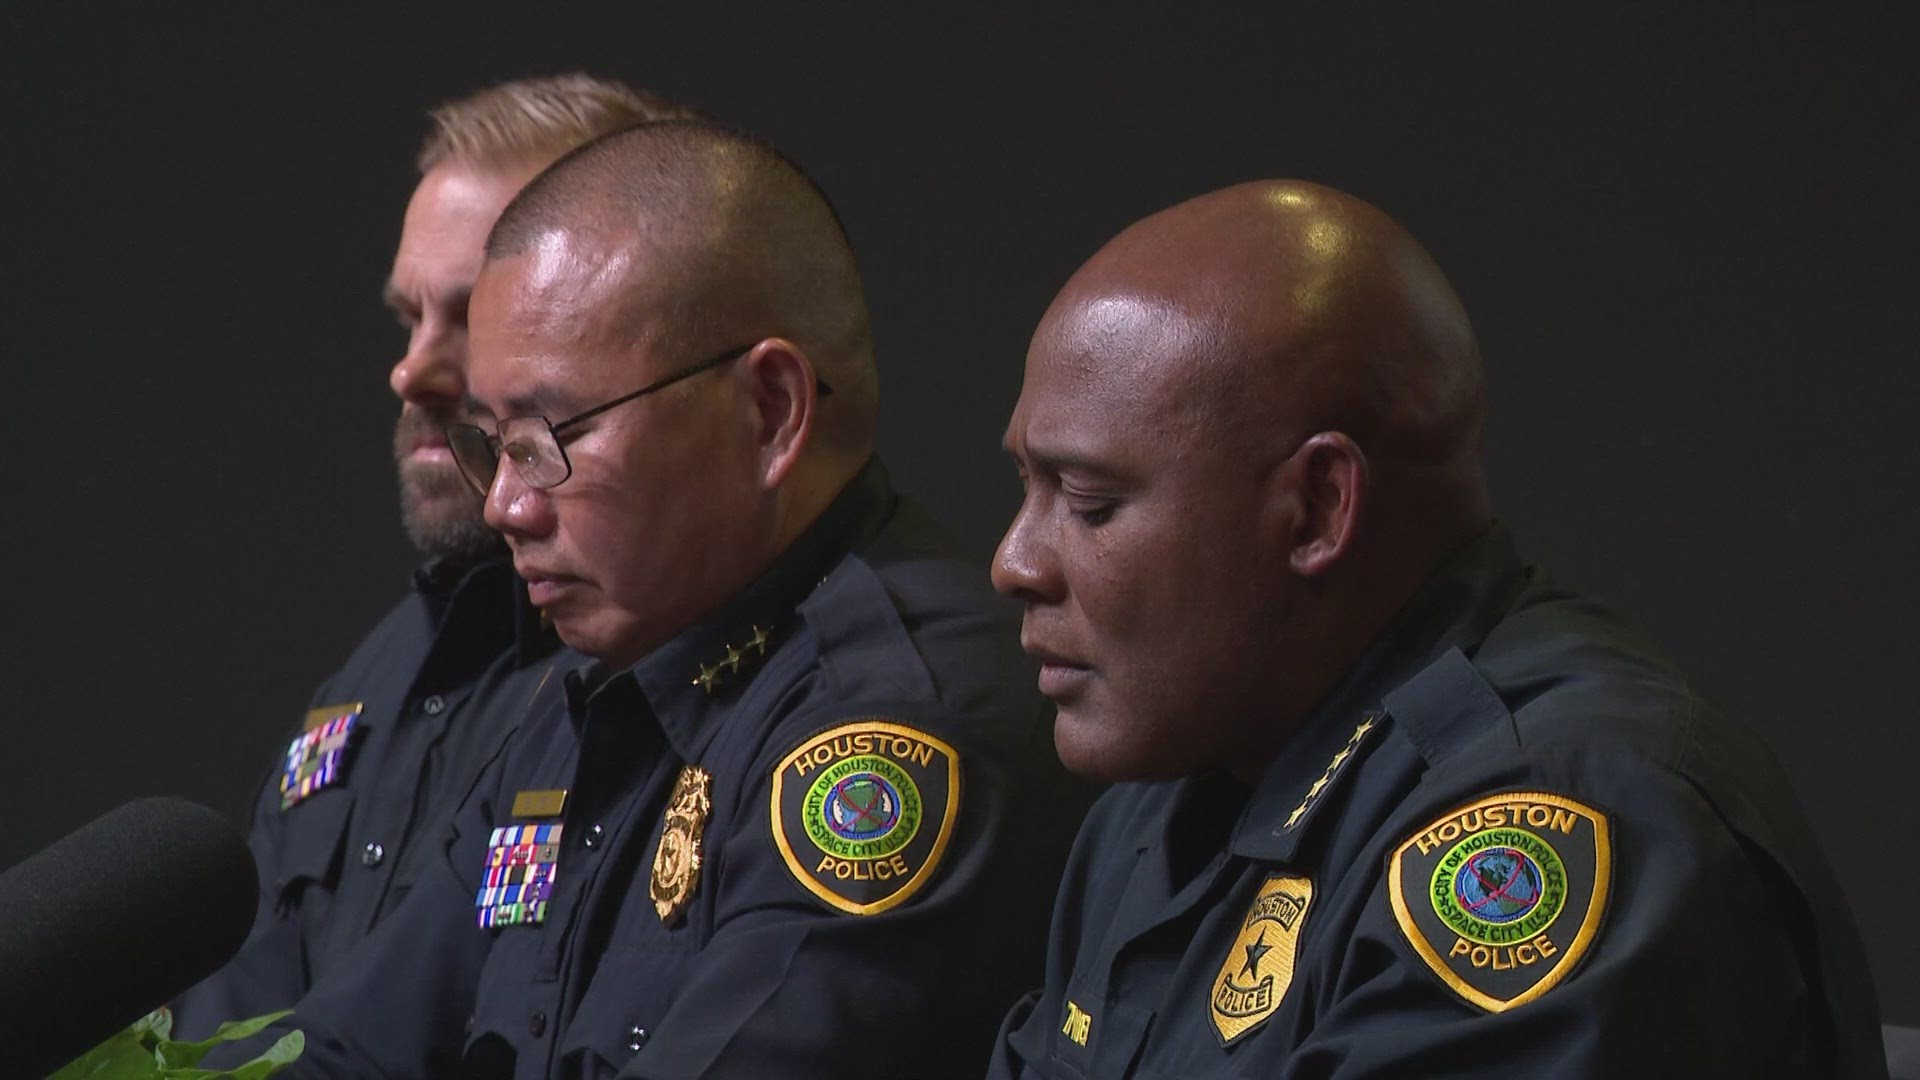 Houston police and elected officials addressed violence against the Asian community at the town hall Thursday night.